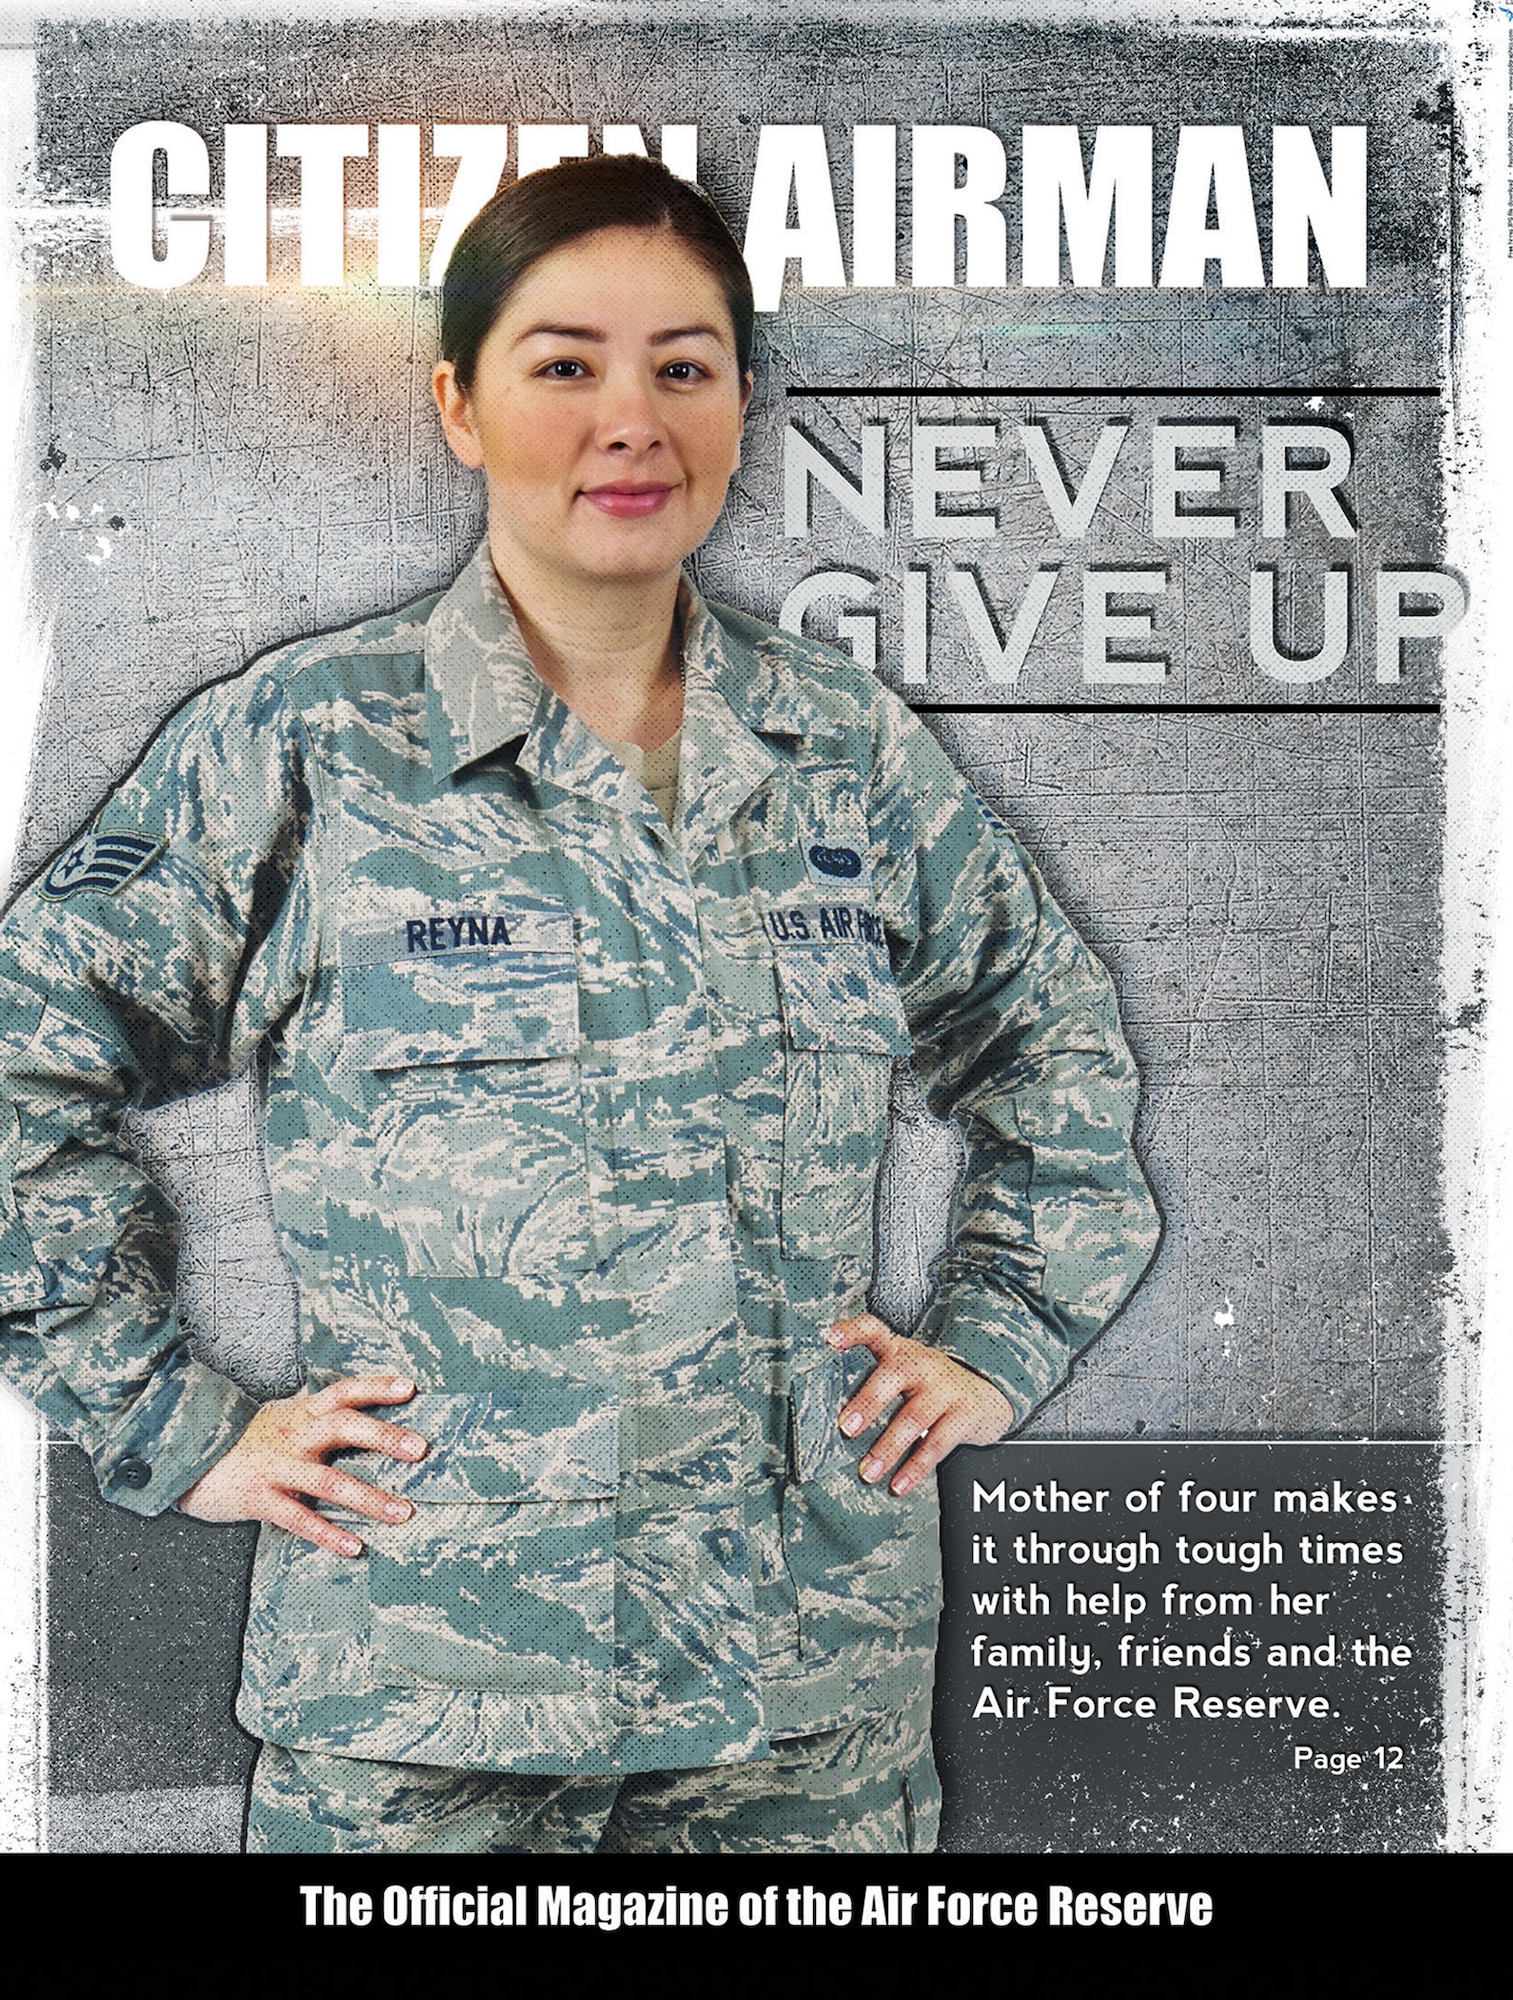 The December issue of Citizen Airman Magazine is now online at http://www.citamn.afrc.af.mil